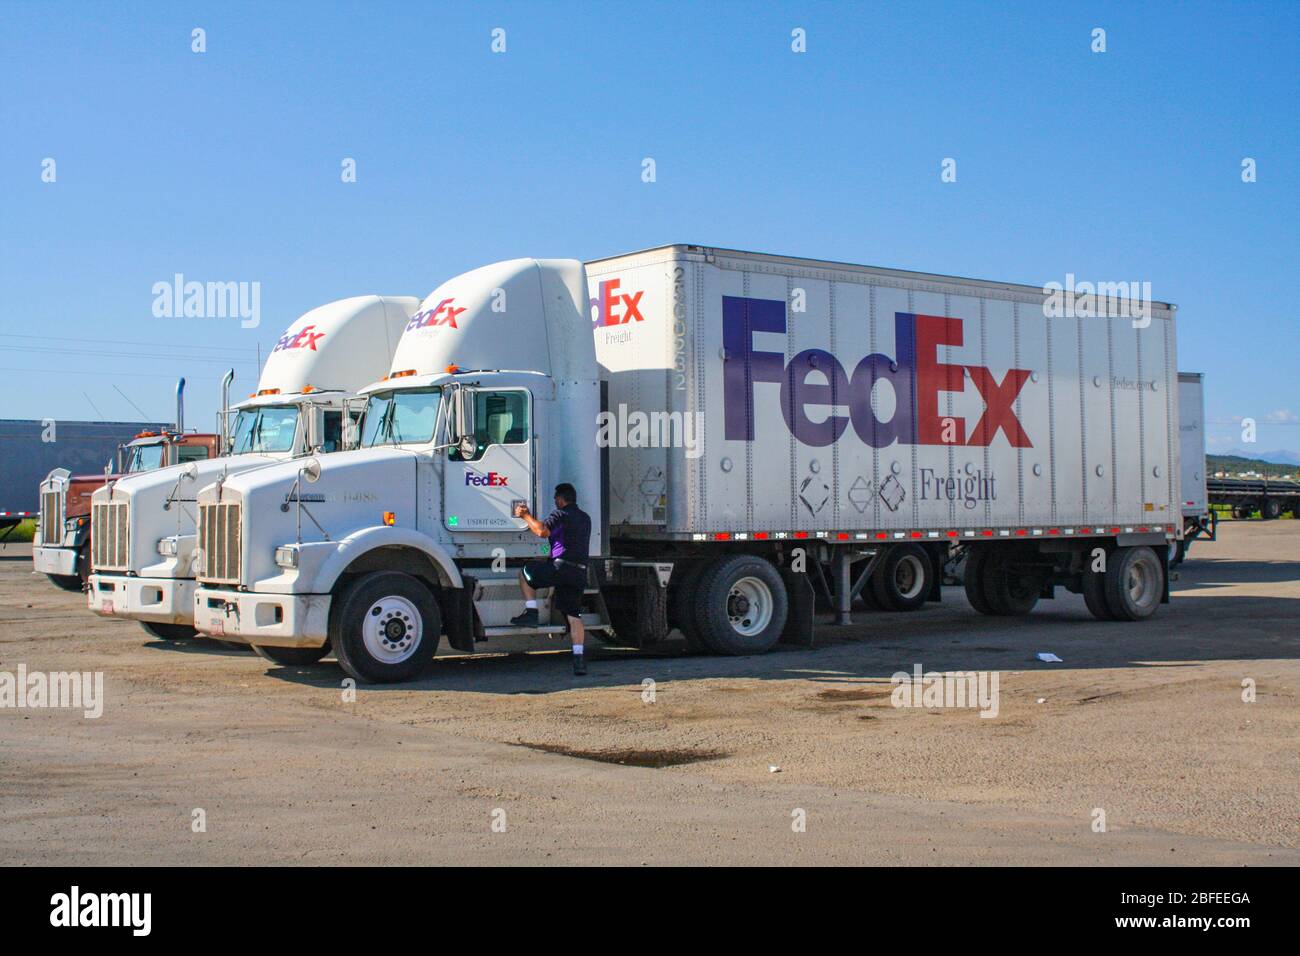 Fedex freight delivery truck with Fedex employee driver climbing into cabin. Trucks lined up parked at rest stop in America with blue sky Stock Photo